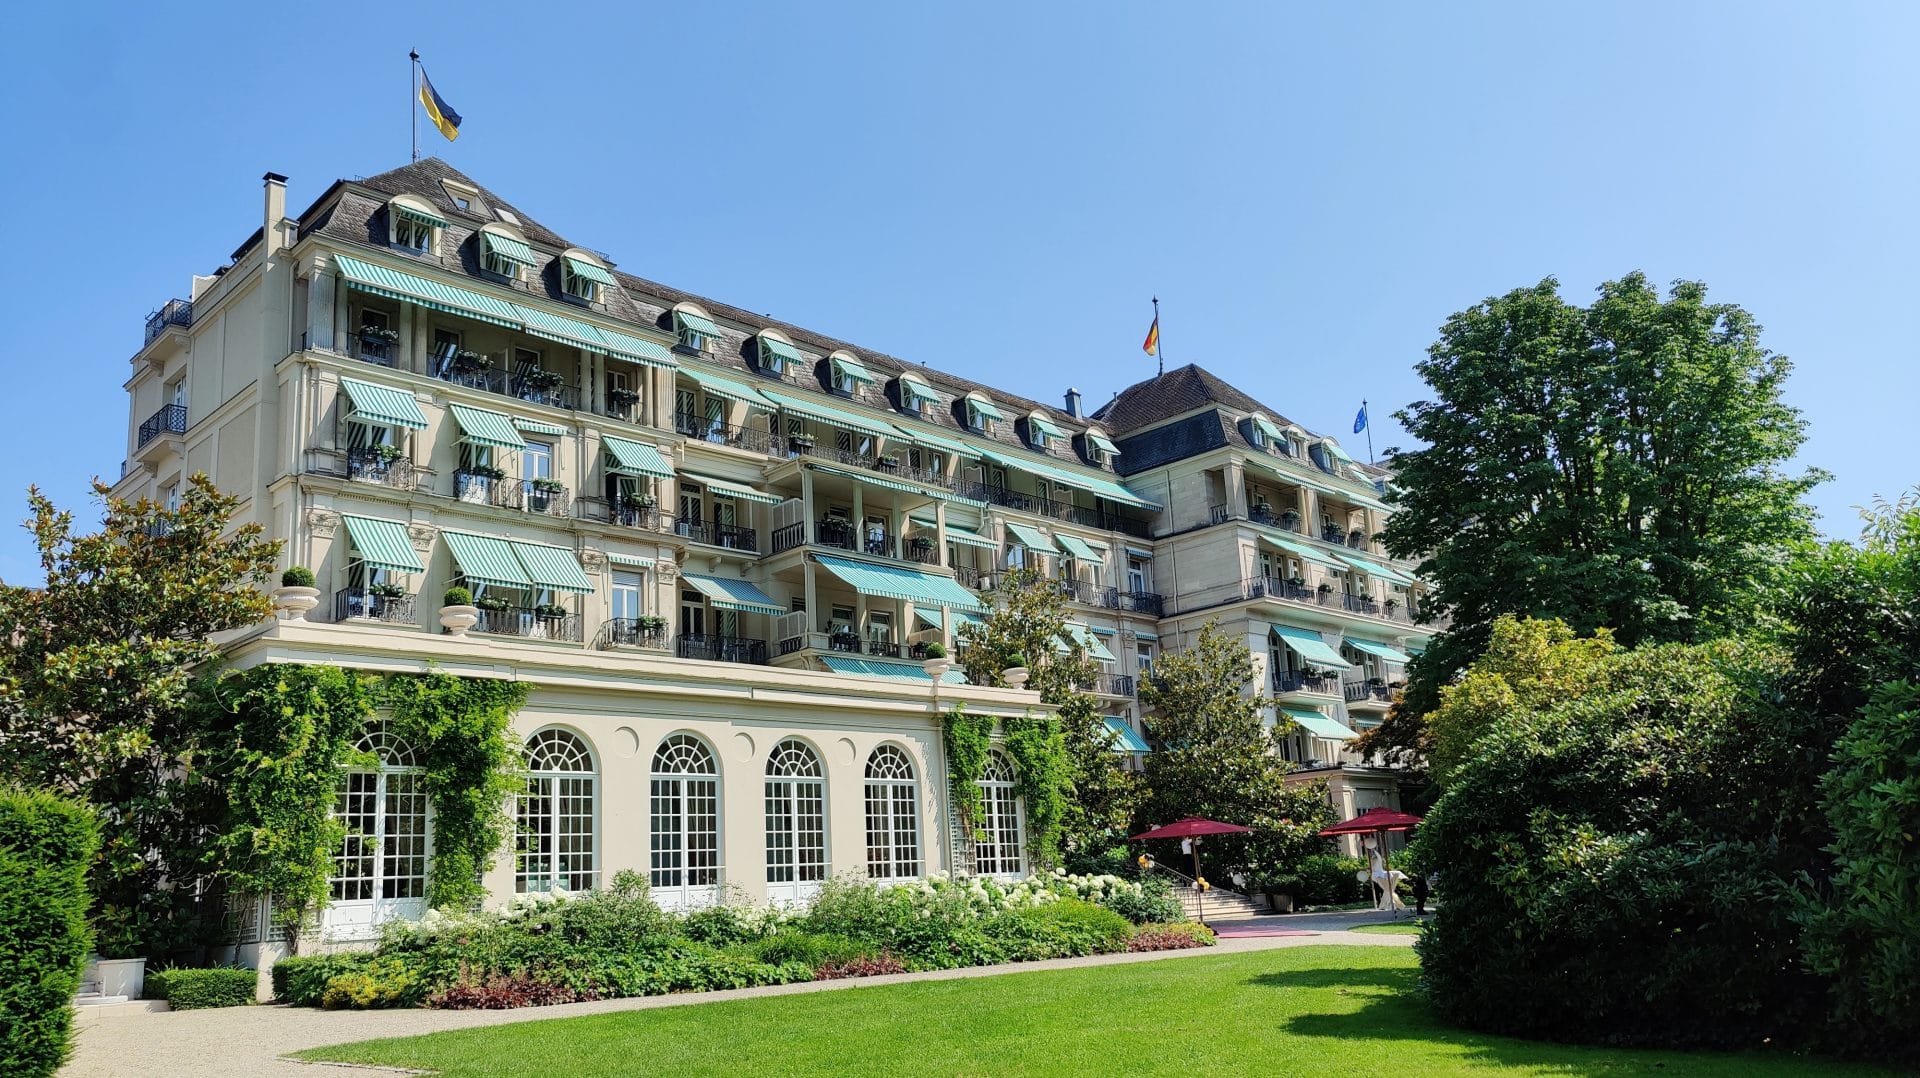 The Brenners Park hotel in Baden Baden